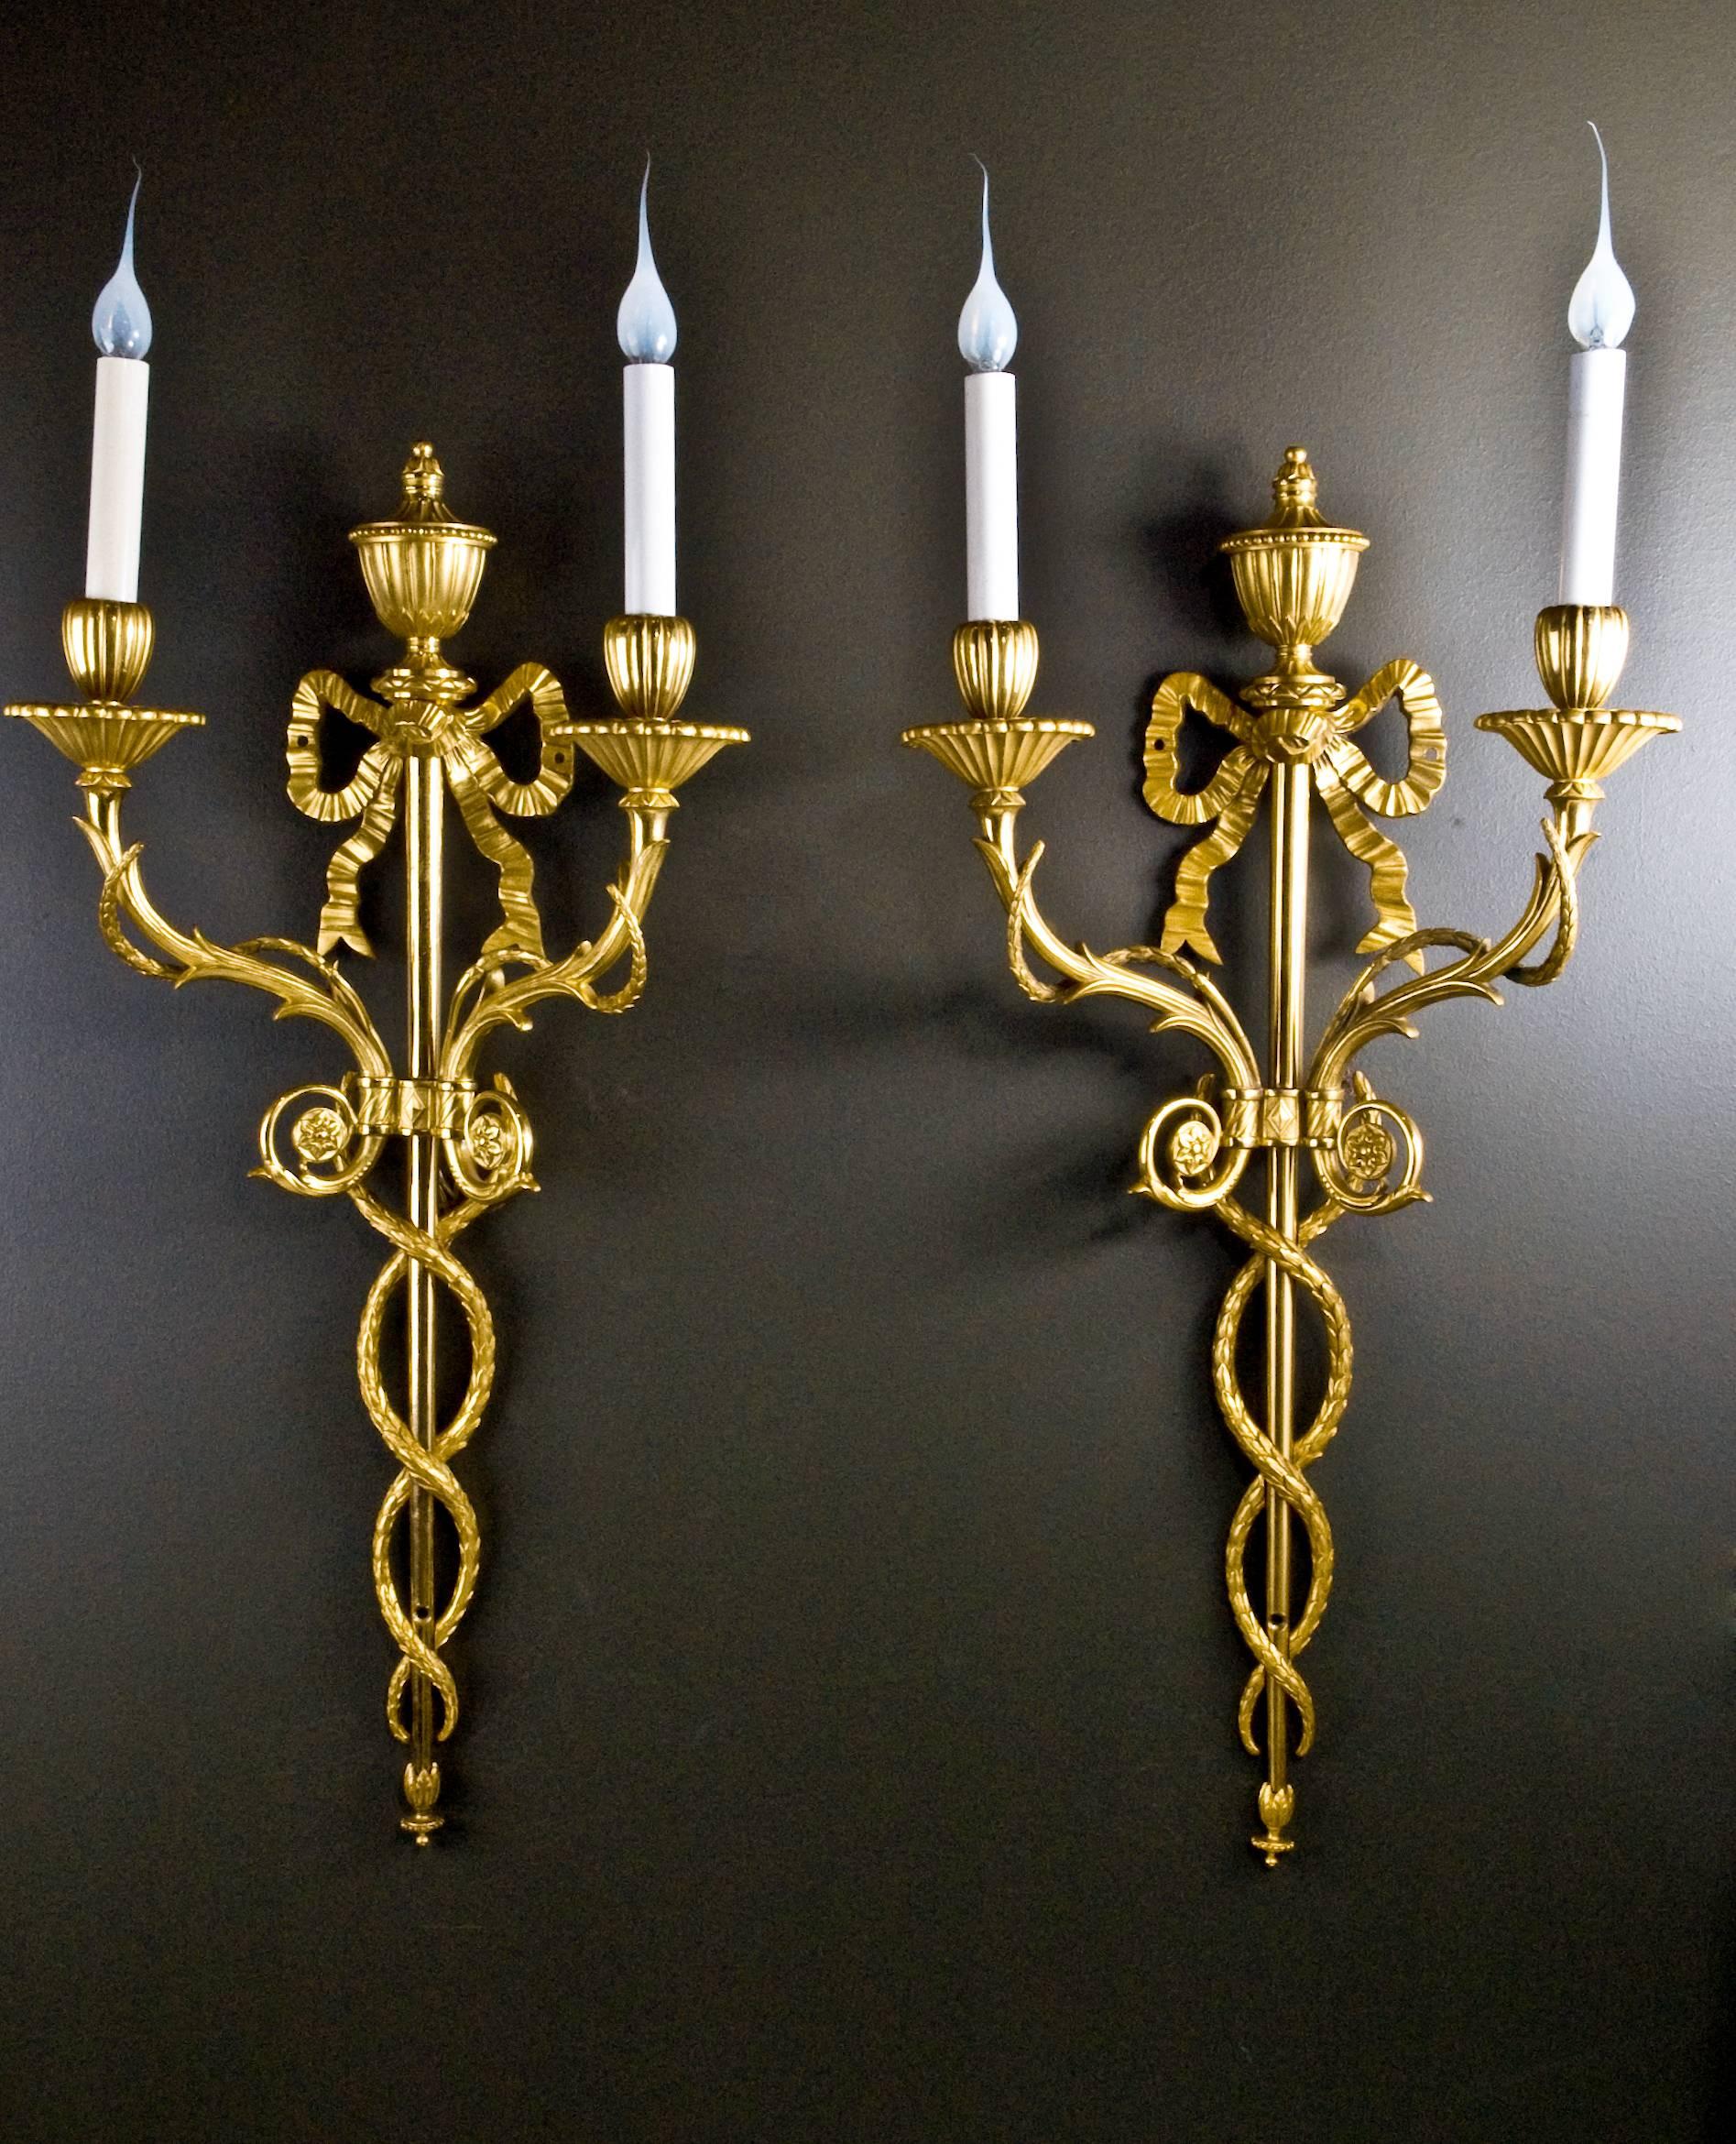 A pair of superb and large antique French Louis XVI style gilt bronze double light wall appliqués of fine quality embellished with a central neoclassical urn and further decorated with a ribbon on the very top.